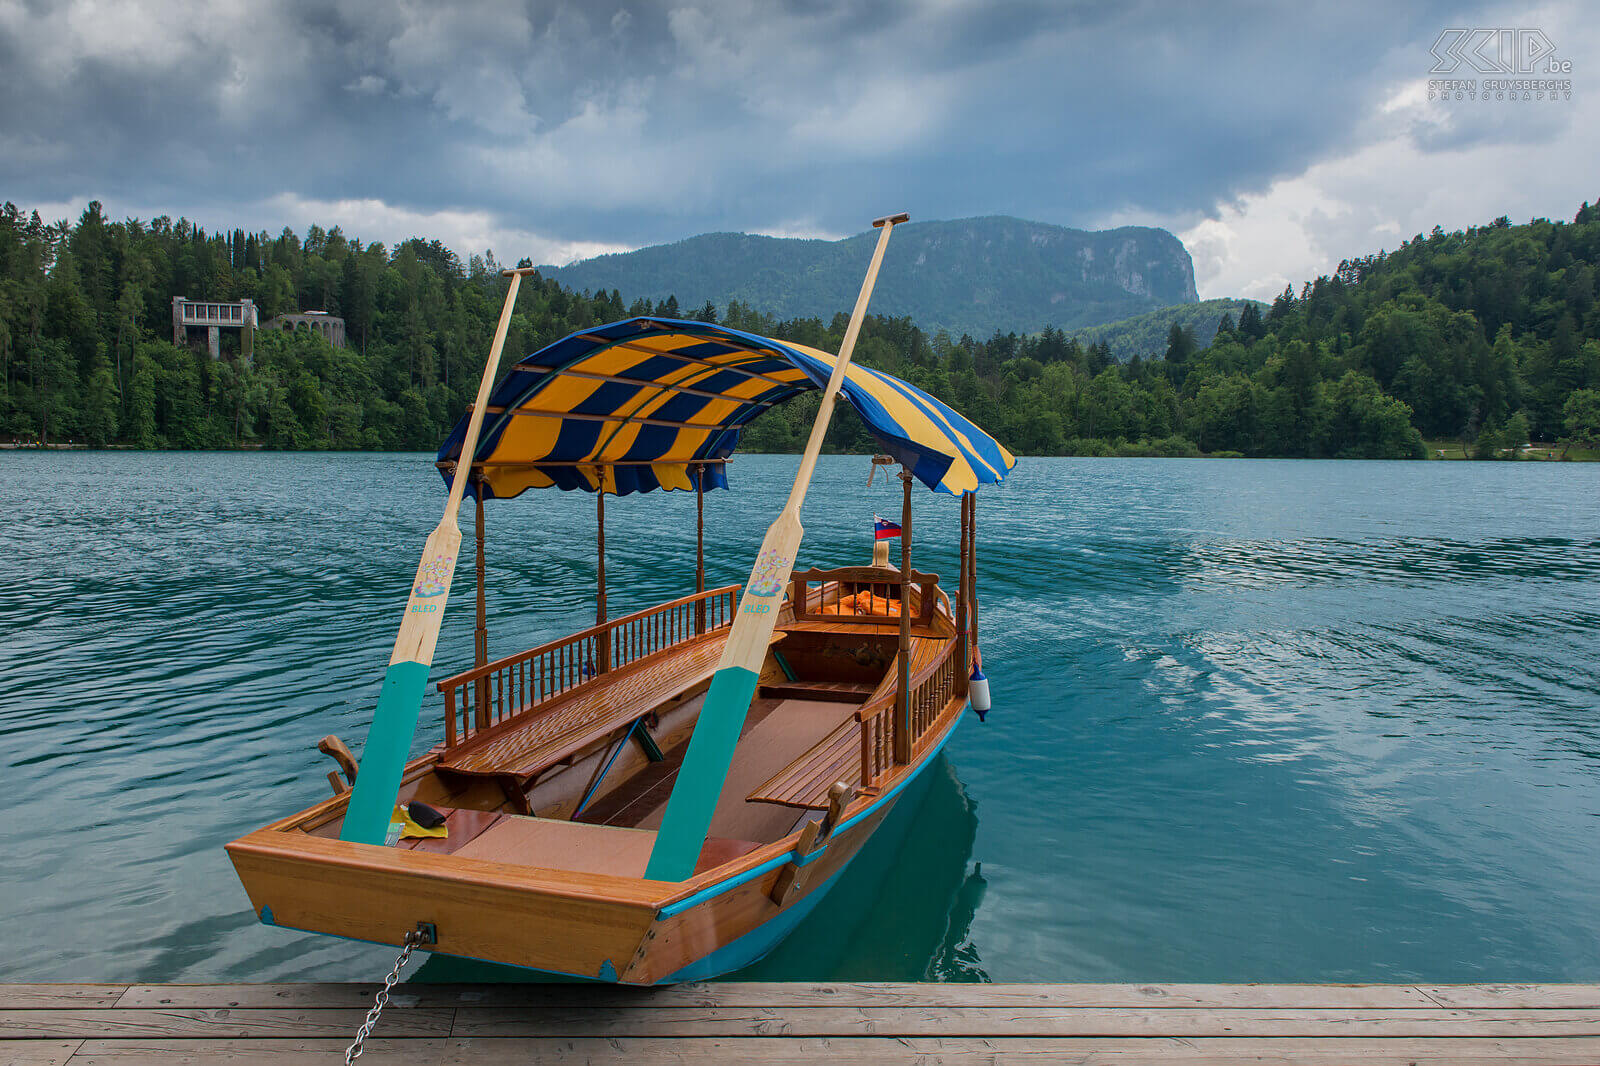 Bled - Pletna The island of lake Bled can be reached via the traditional wooden pletna boats. Stefan Cruysberghs